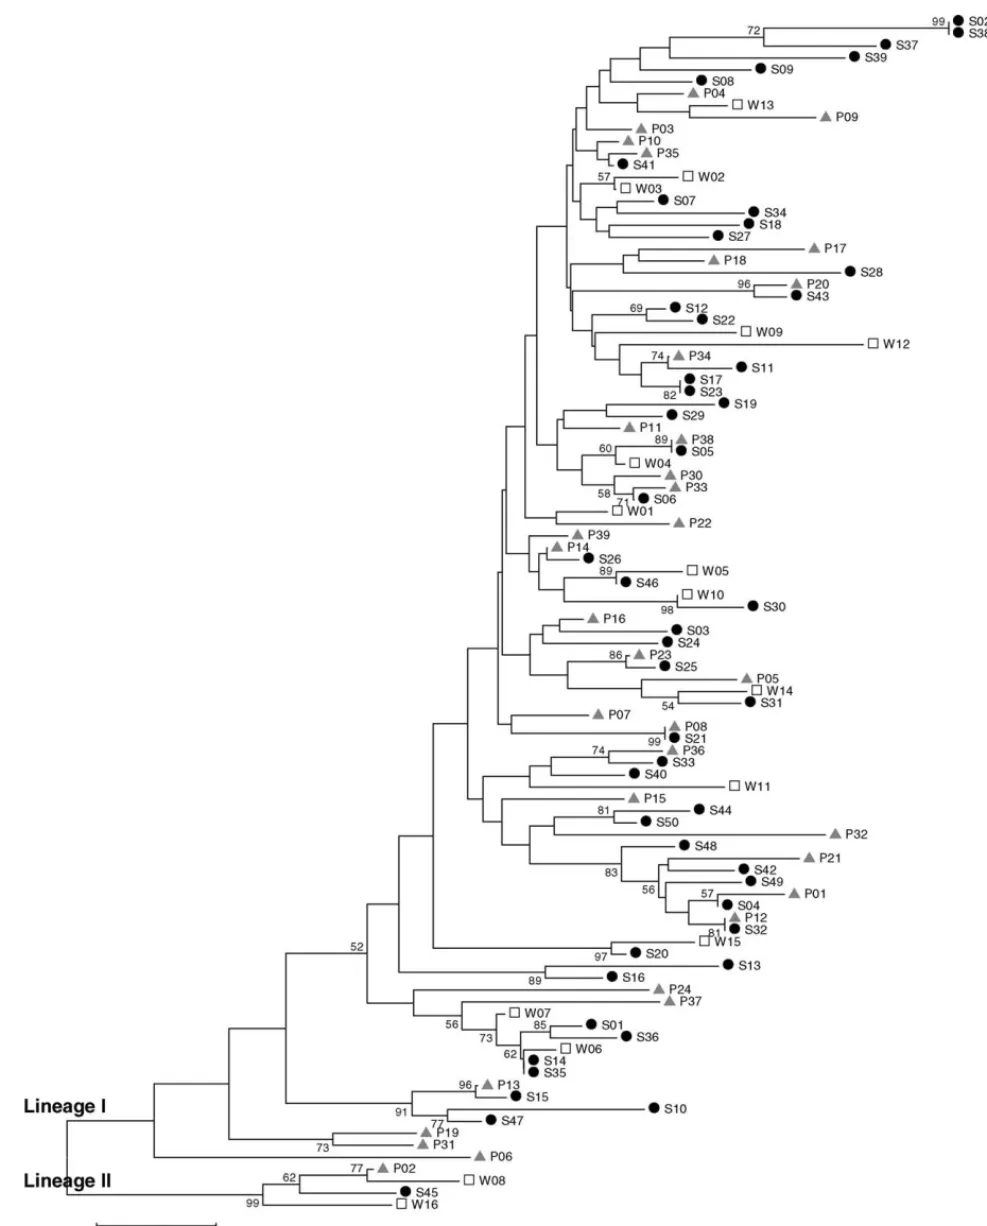 Fig. 2. Neighbor-joining tree estimated from Kimura two-parameter distances among mtDNA lineages of bigeye tuna